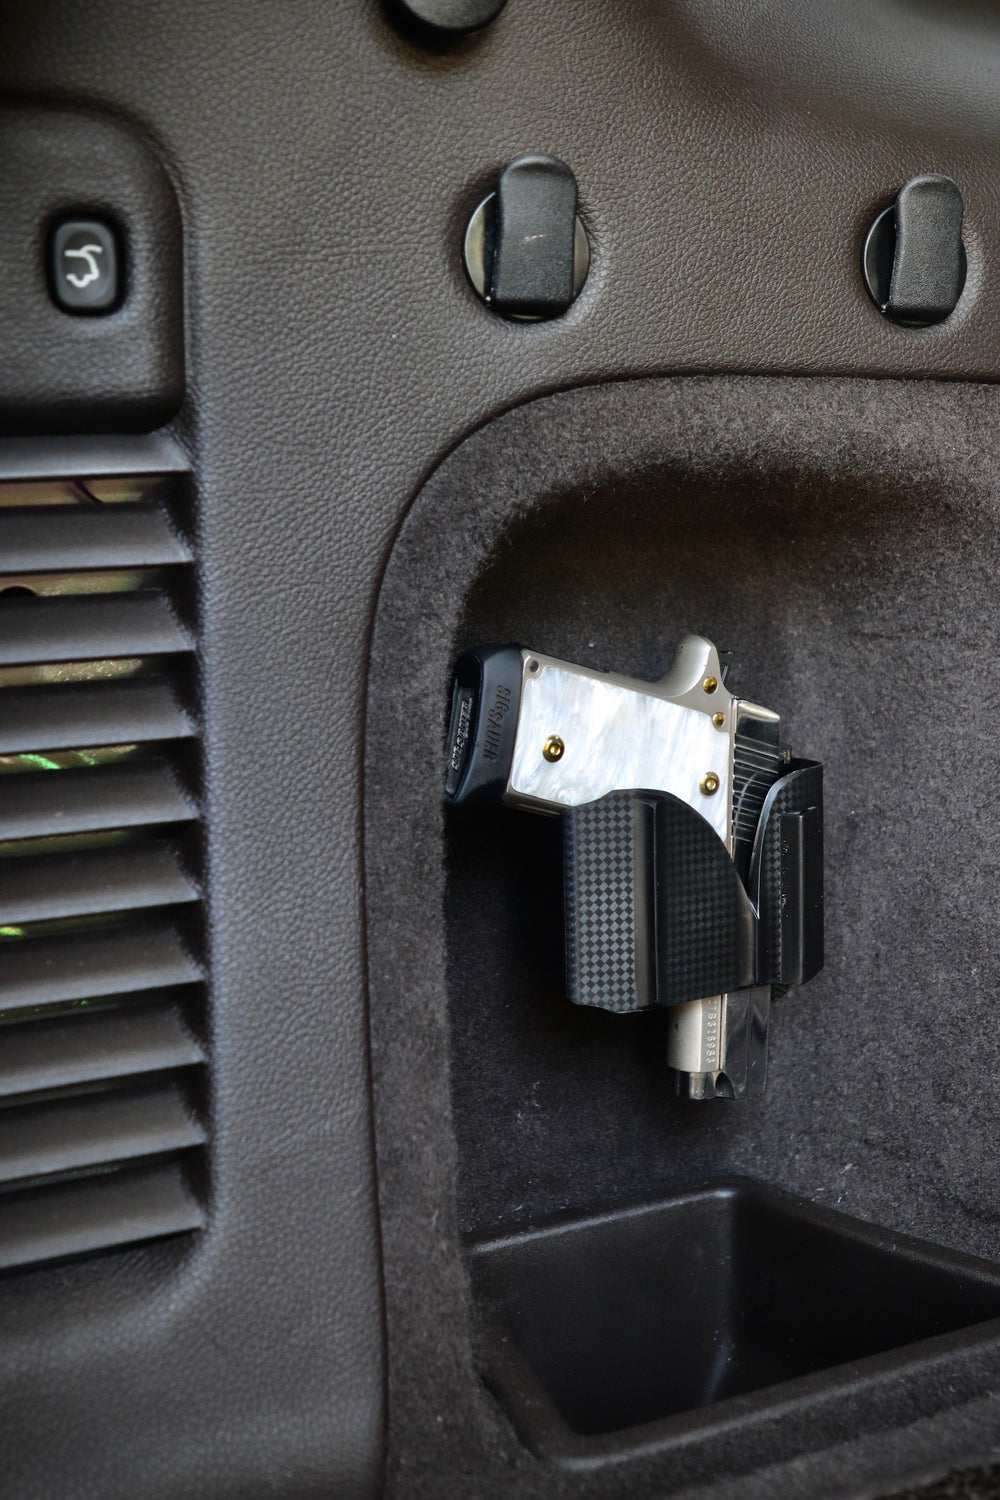 CoJo universal gun holster mounted in the side panel of a vehicle